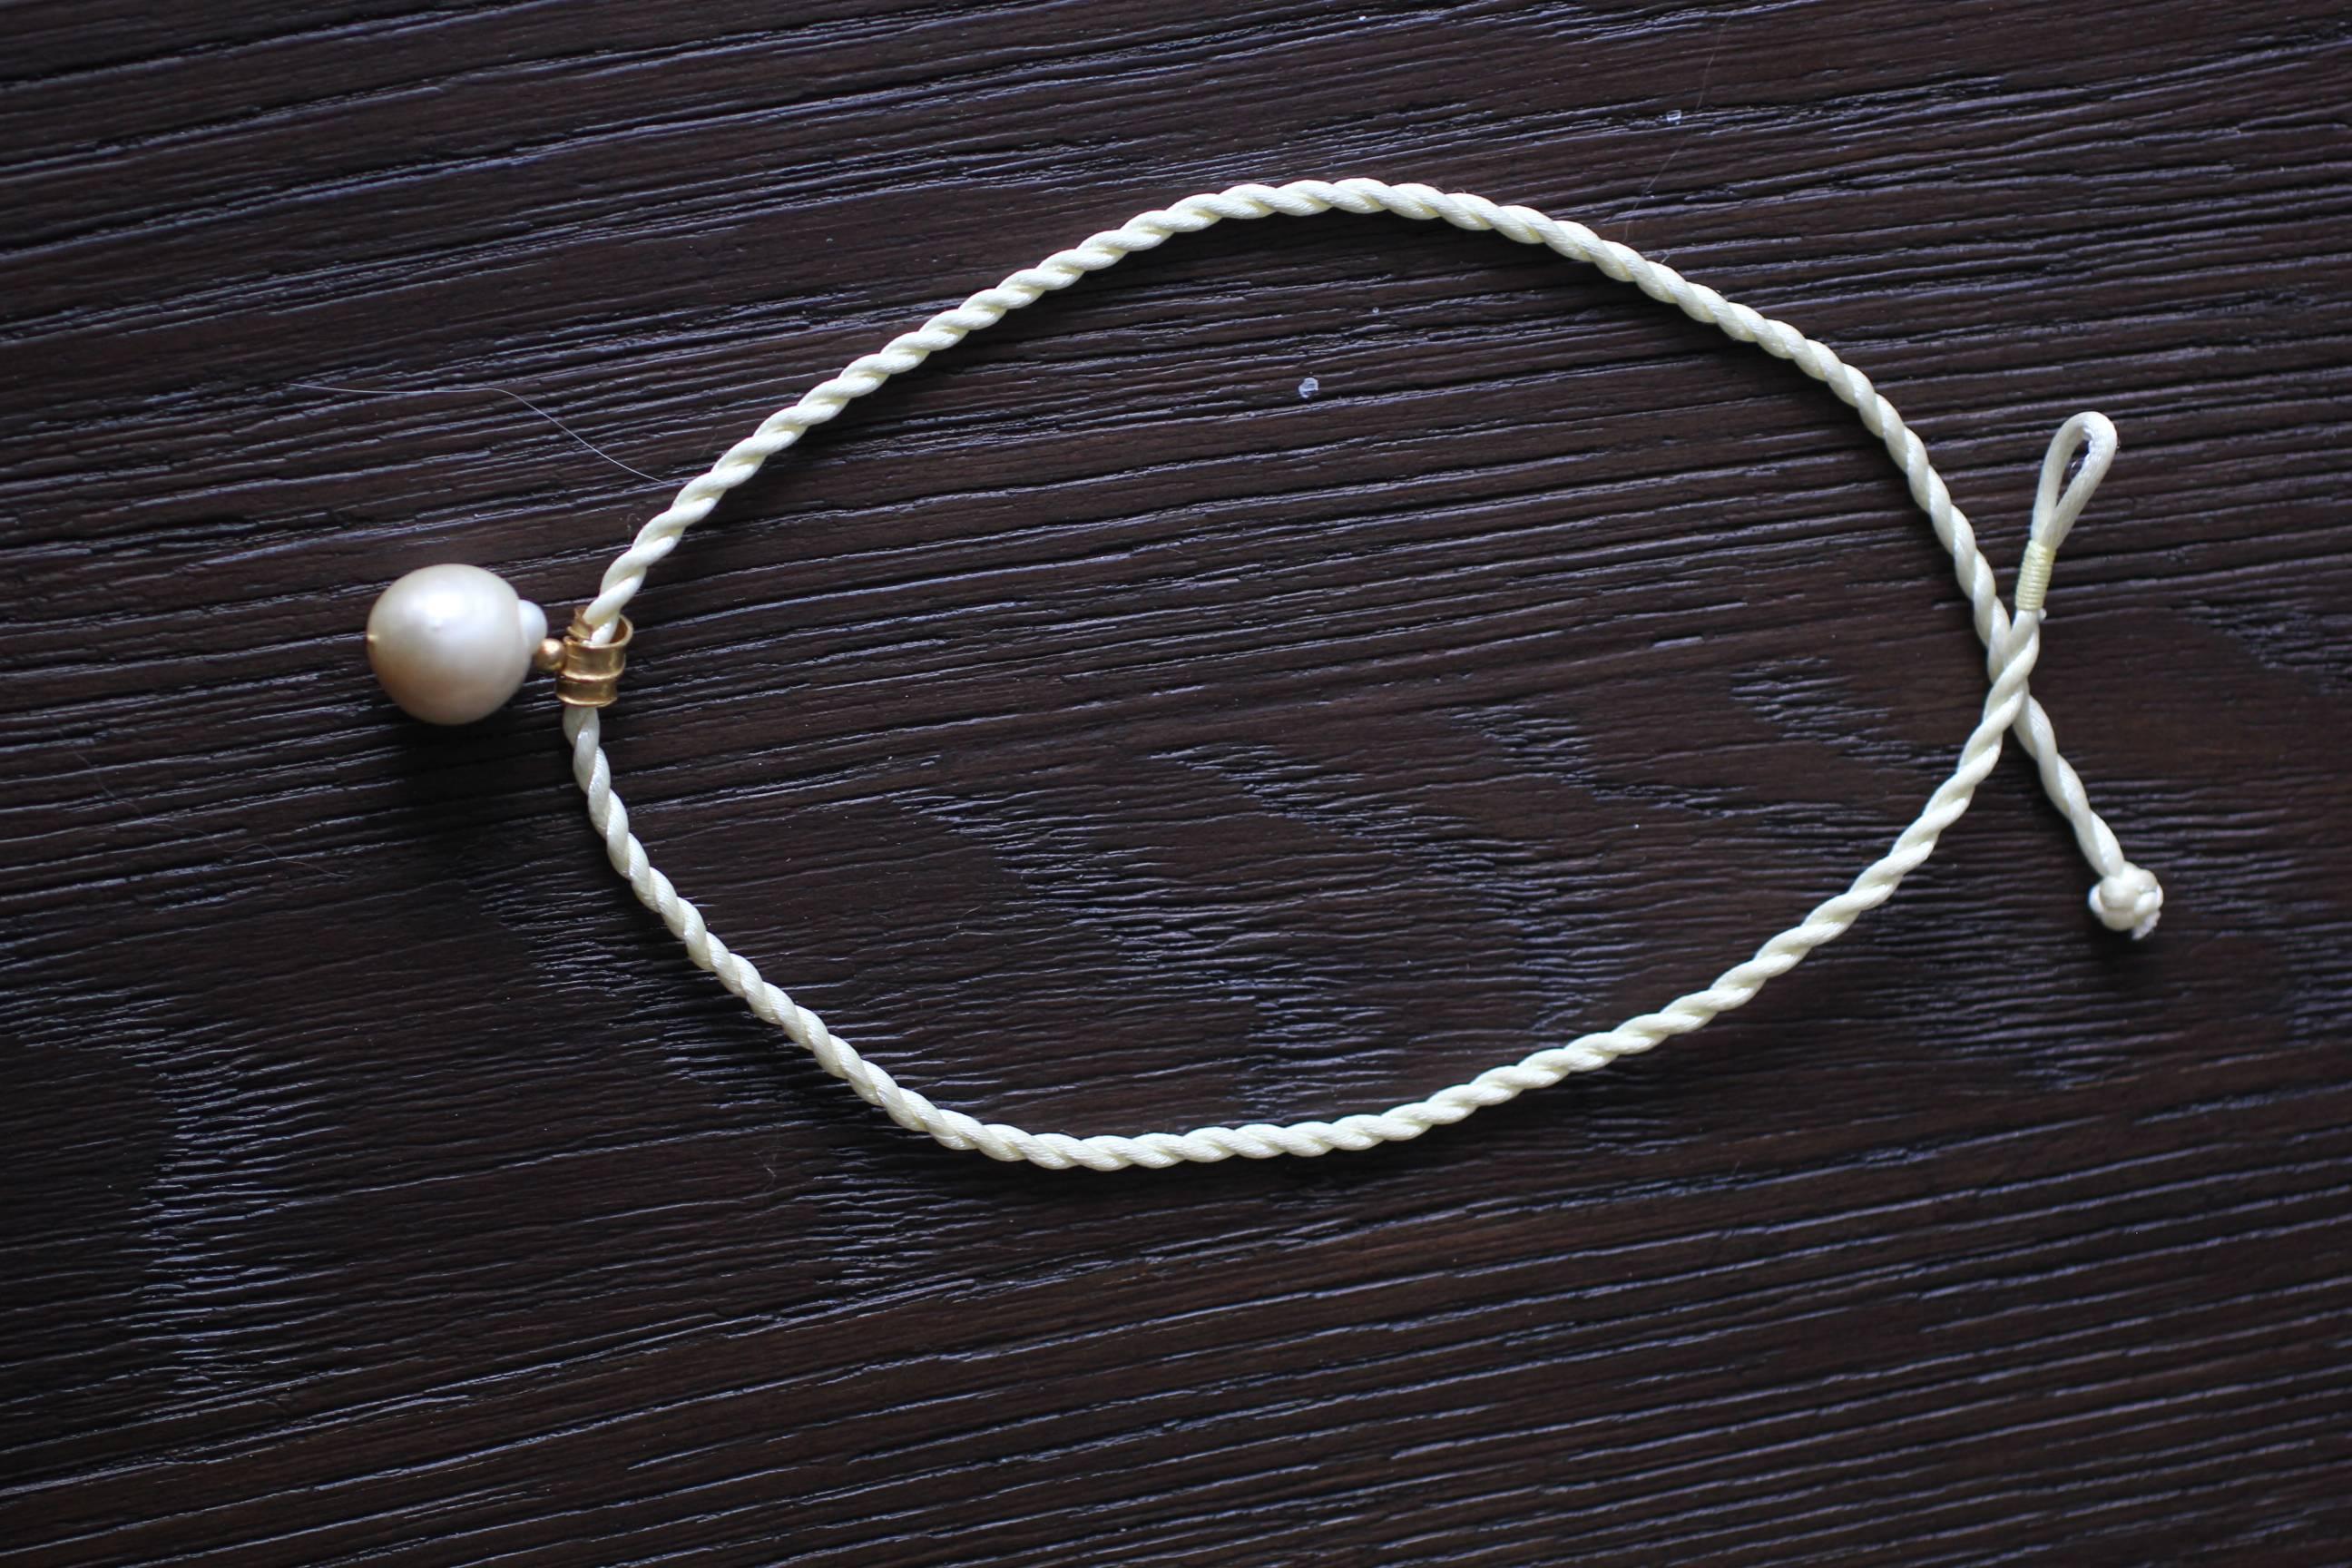 In The Sea South Sea pendant. Made to order, custom made hand formed chocker pendant. White Baroque South Sea pearl hangs off of organically shaped bail hand forged of 21K gold. No two necklaces are identical. 

The inspiration for this pendant